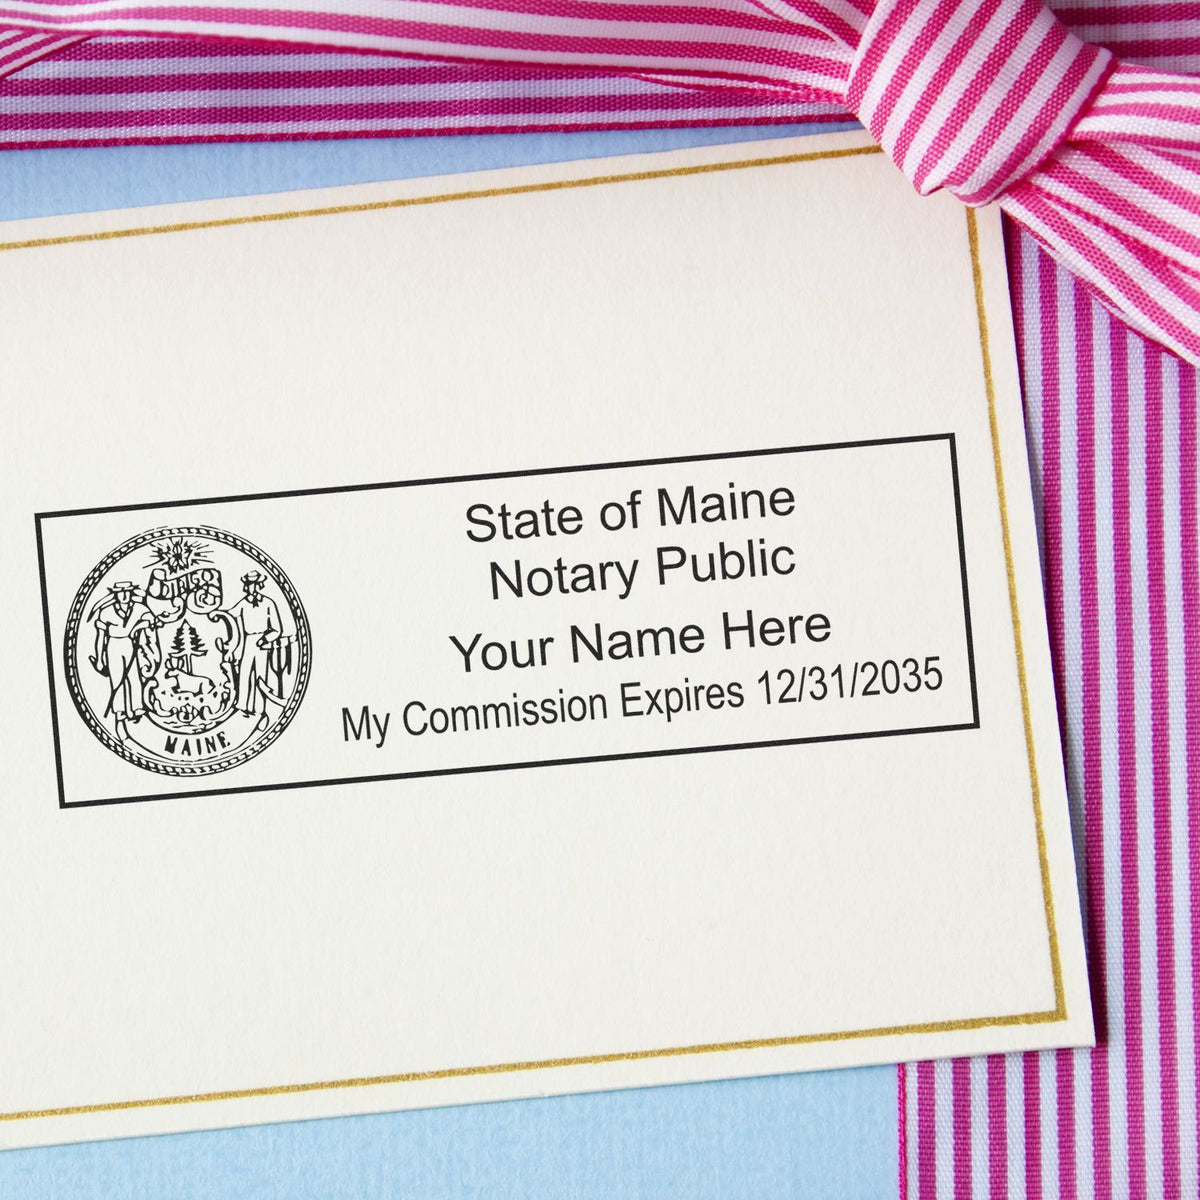 A photograph of the MaxLight Premium Pre-Inked Maine State Seal Notarial Stamp stamp impression reveals a vivid, professional image of the on paper.